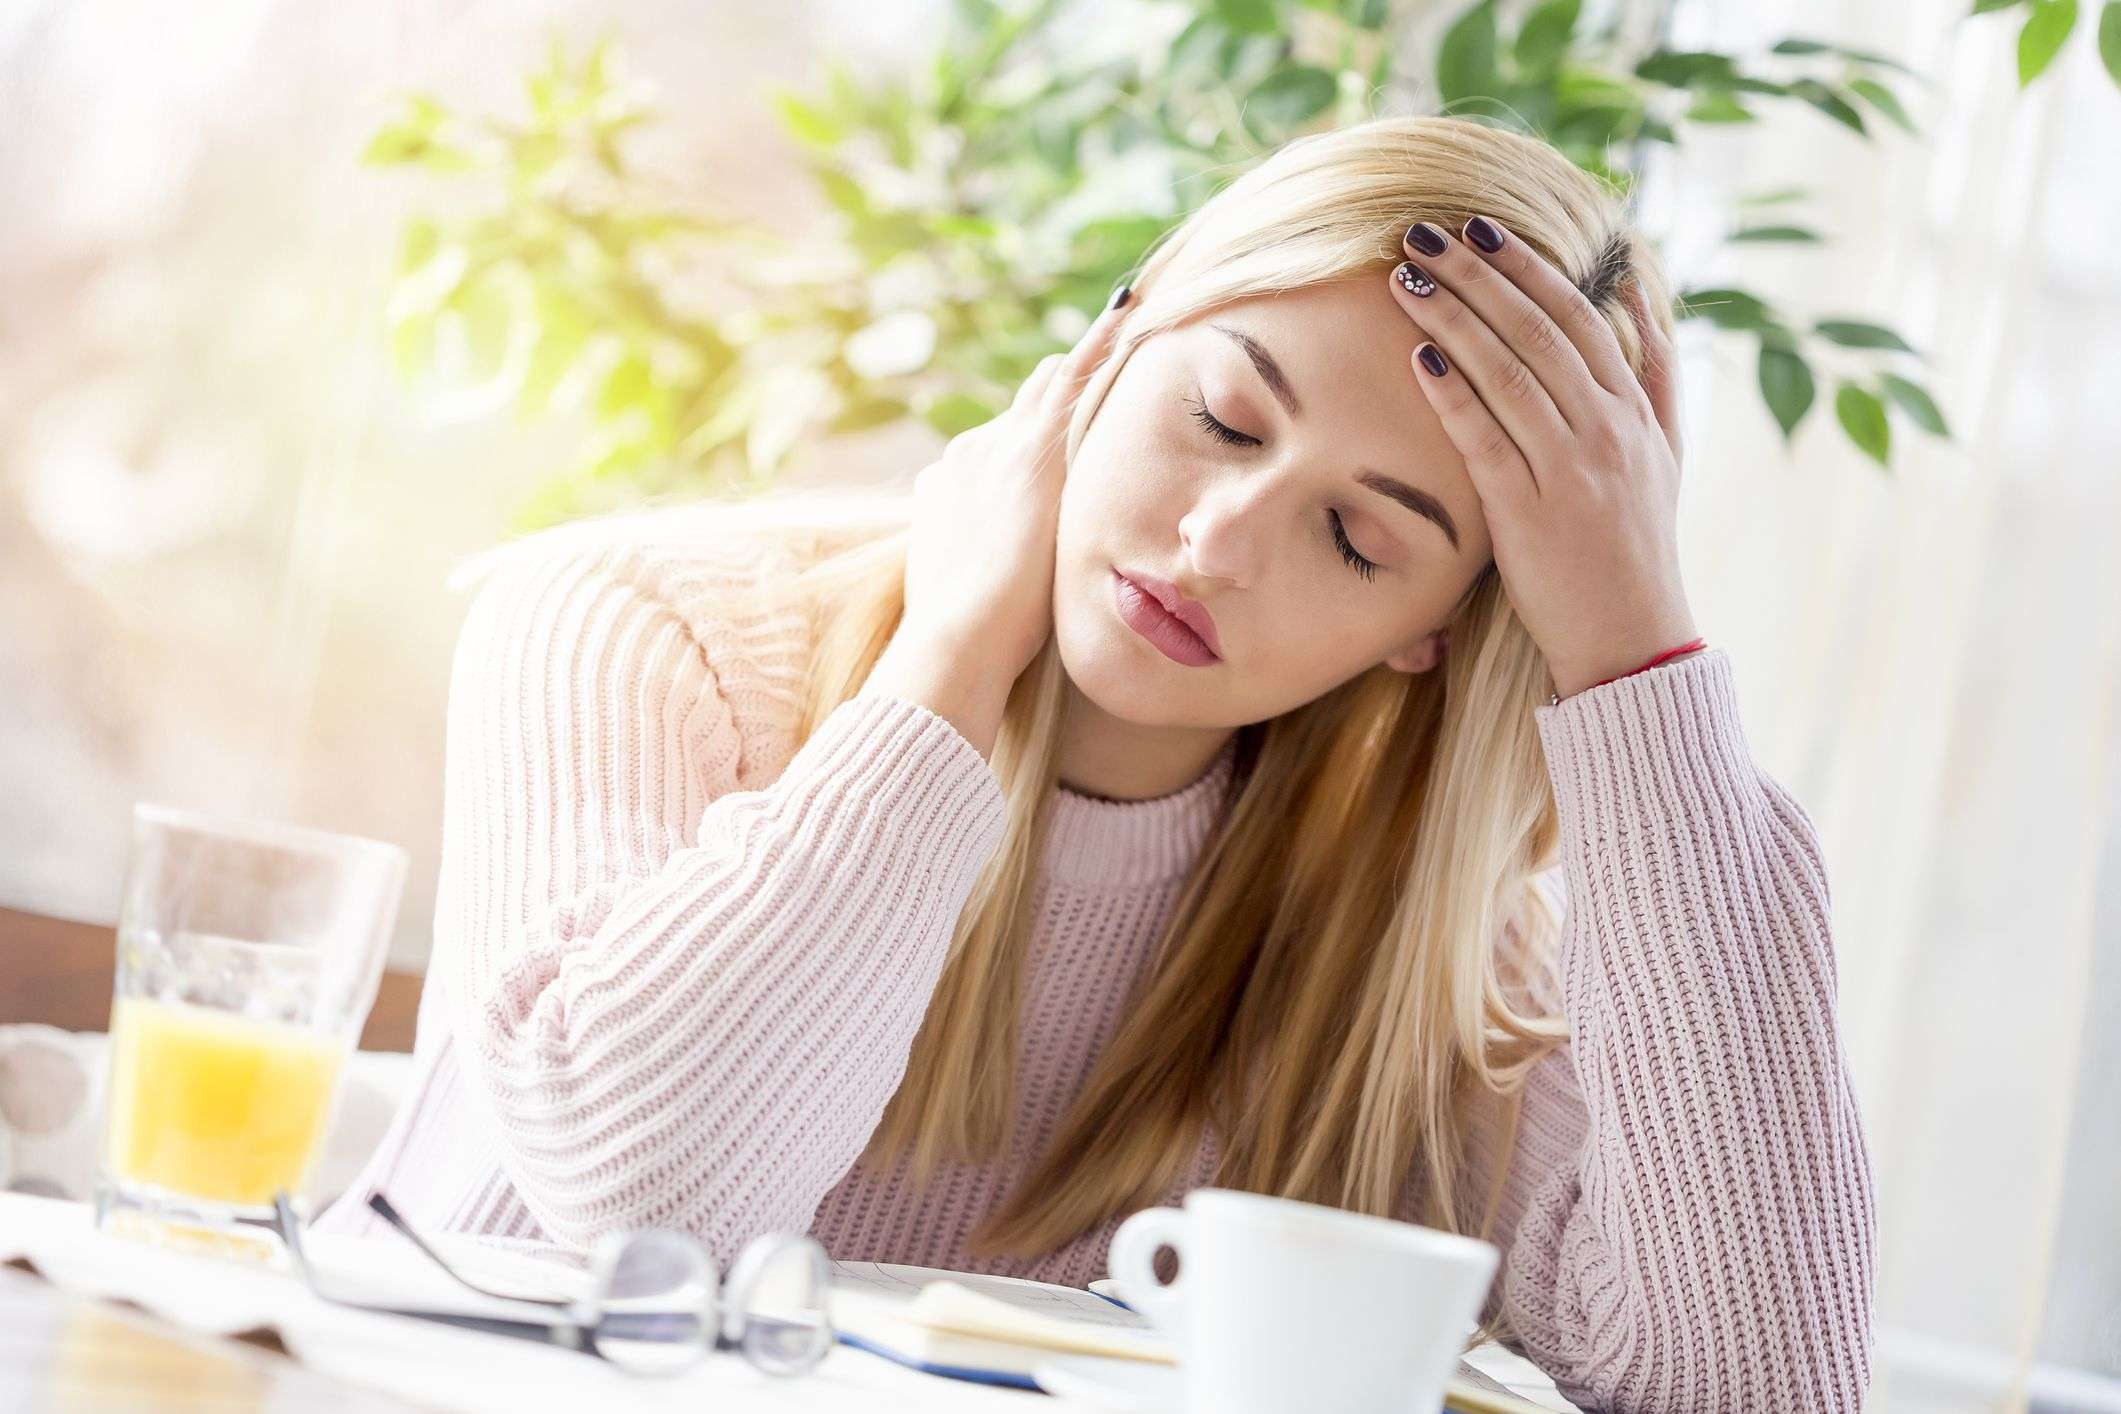 How to Deal With Cancer Fatigue